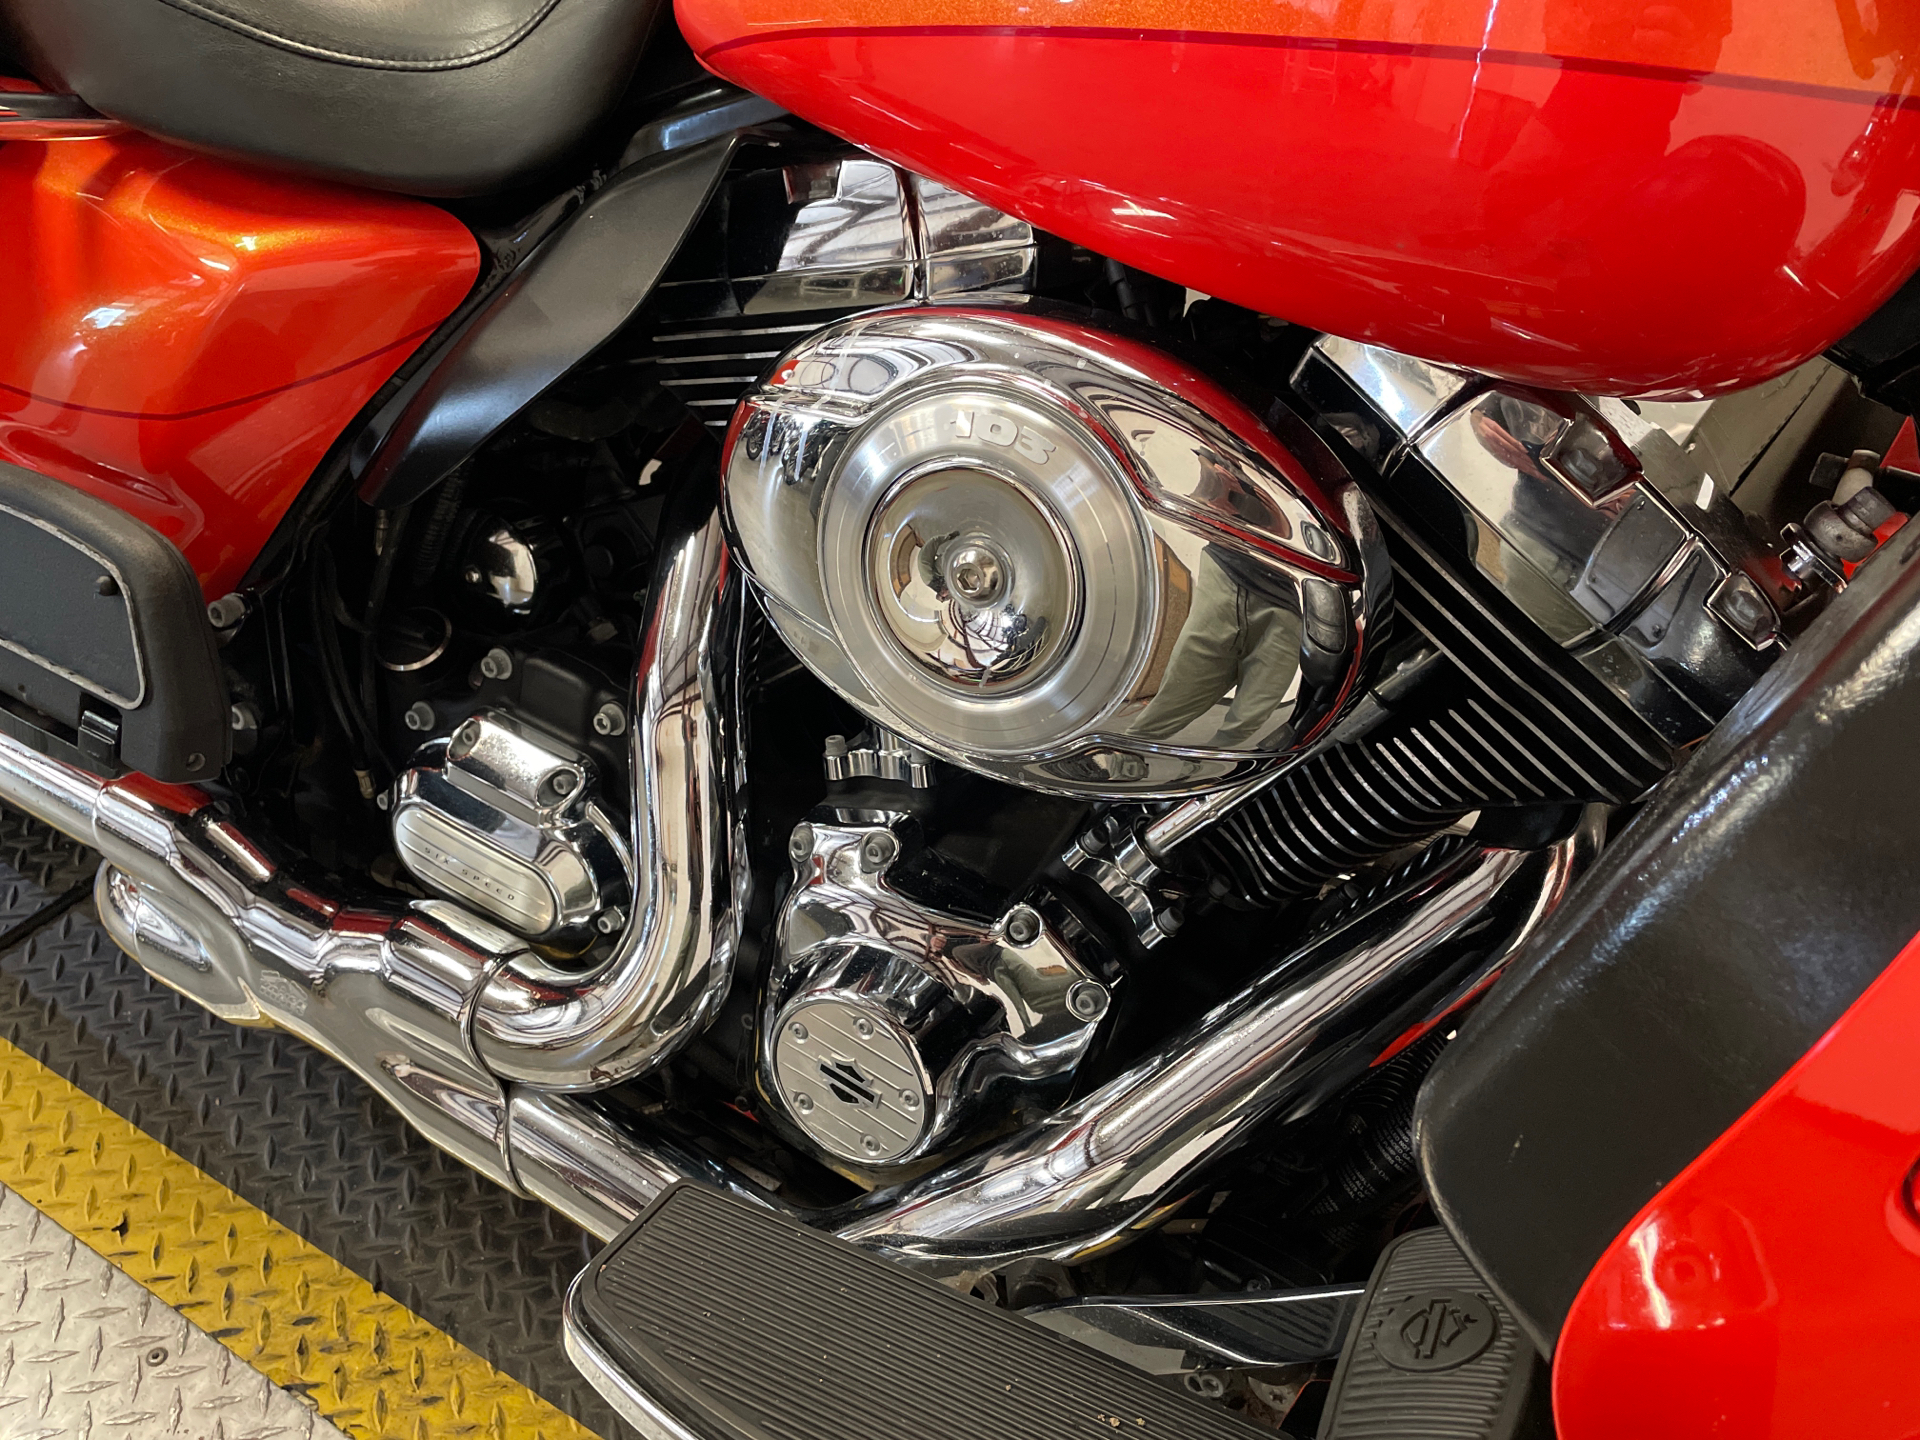 2015 Harley-Davidson Electra Glide available - Photo 9